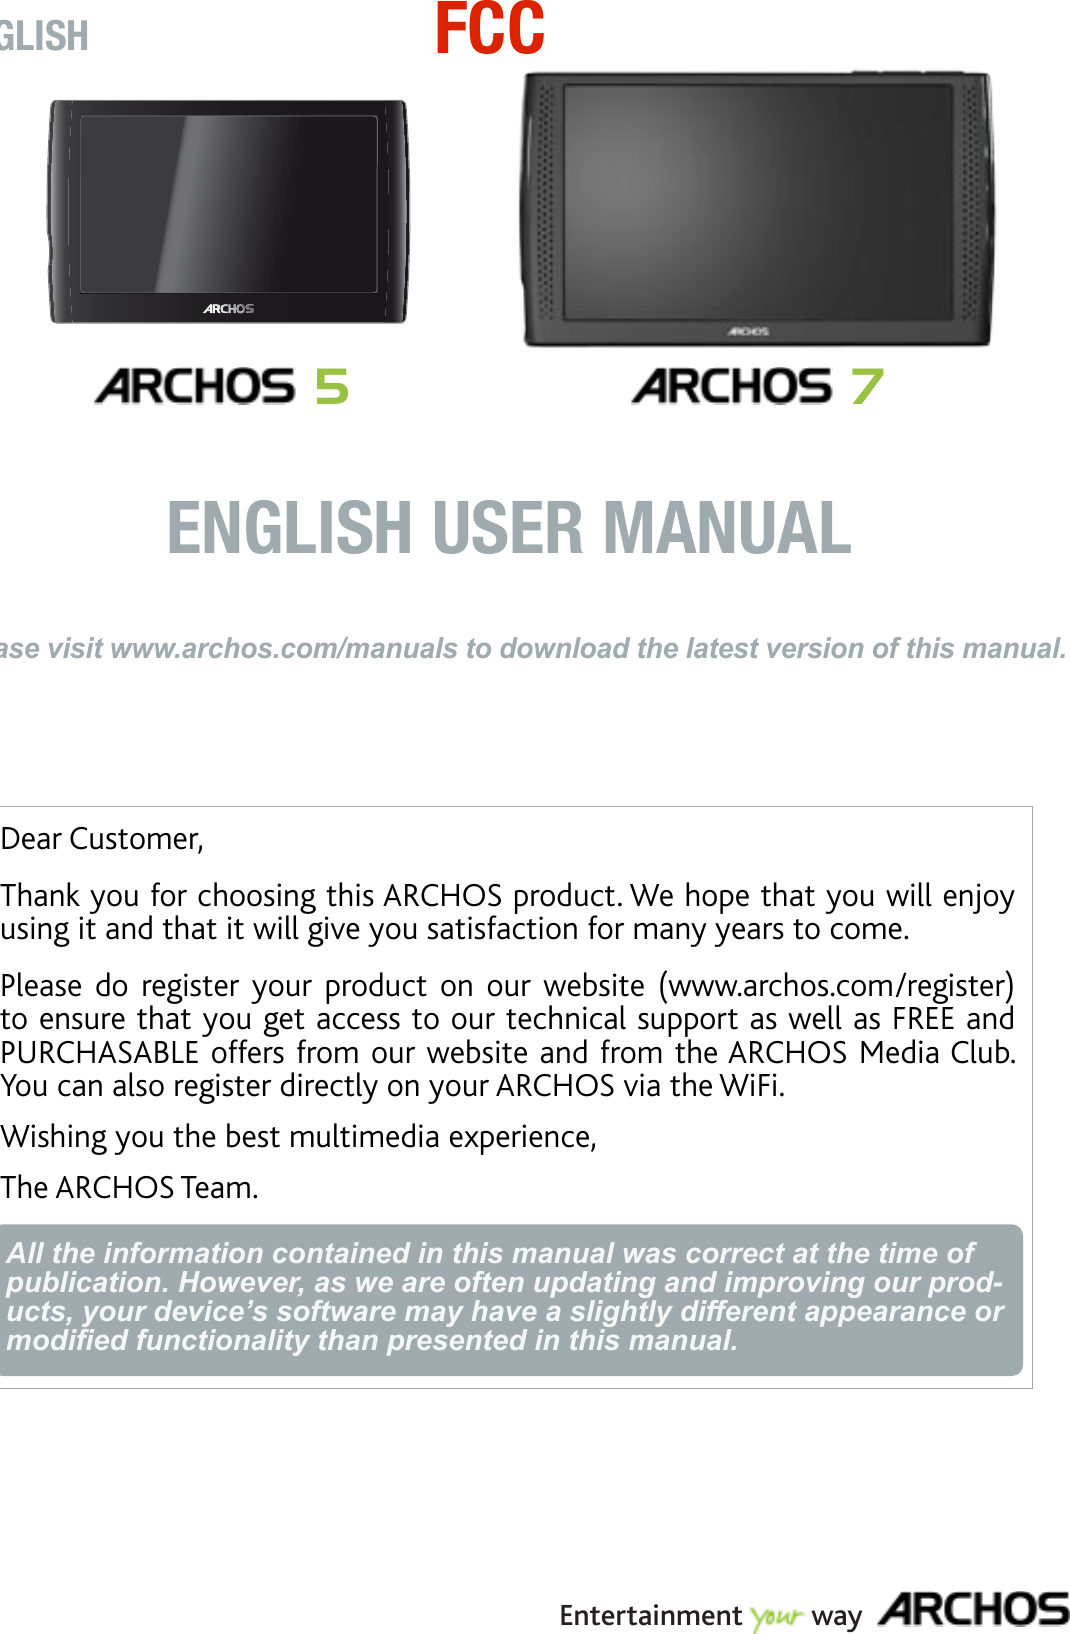 Dear Customer,Thank you for choosing this ARCHOS product. We hope that you will enjoy using it and that it will give you satisfaction for many years to come.Please  do  register  your  product  on  our  website  (www.archos.com/register) to ensure that you get access to our technical support as well as FREE and PURCHASABLE offers from our website and from the ARCHOS Media Club. You can also register directly on your ARCHOS via the WiFi.Wishing you the best multimedia experience,The ARCHOS Team.All the information contained in this manual was correct at the time of publication. However, as we are often updating and improving our prod-ucts, your device’s software may have a slightly different appearance or modied functionality than presented in this manual.ENGLISHPlease visit www.archos.com/manuals to download the latest version of this manual.ENGLISH USER MANUALEntertainment         way 5 7FCC